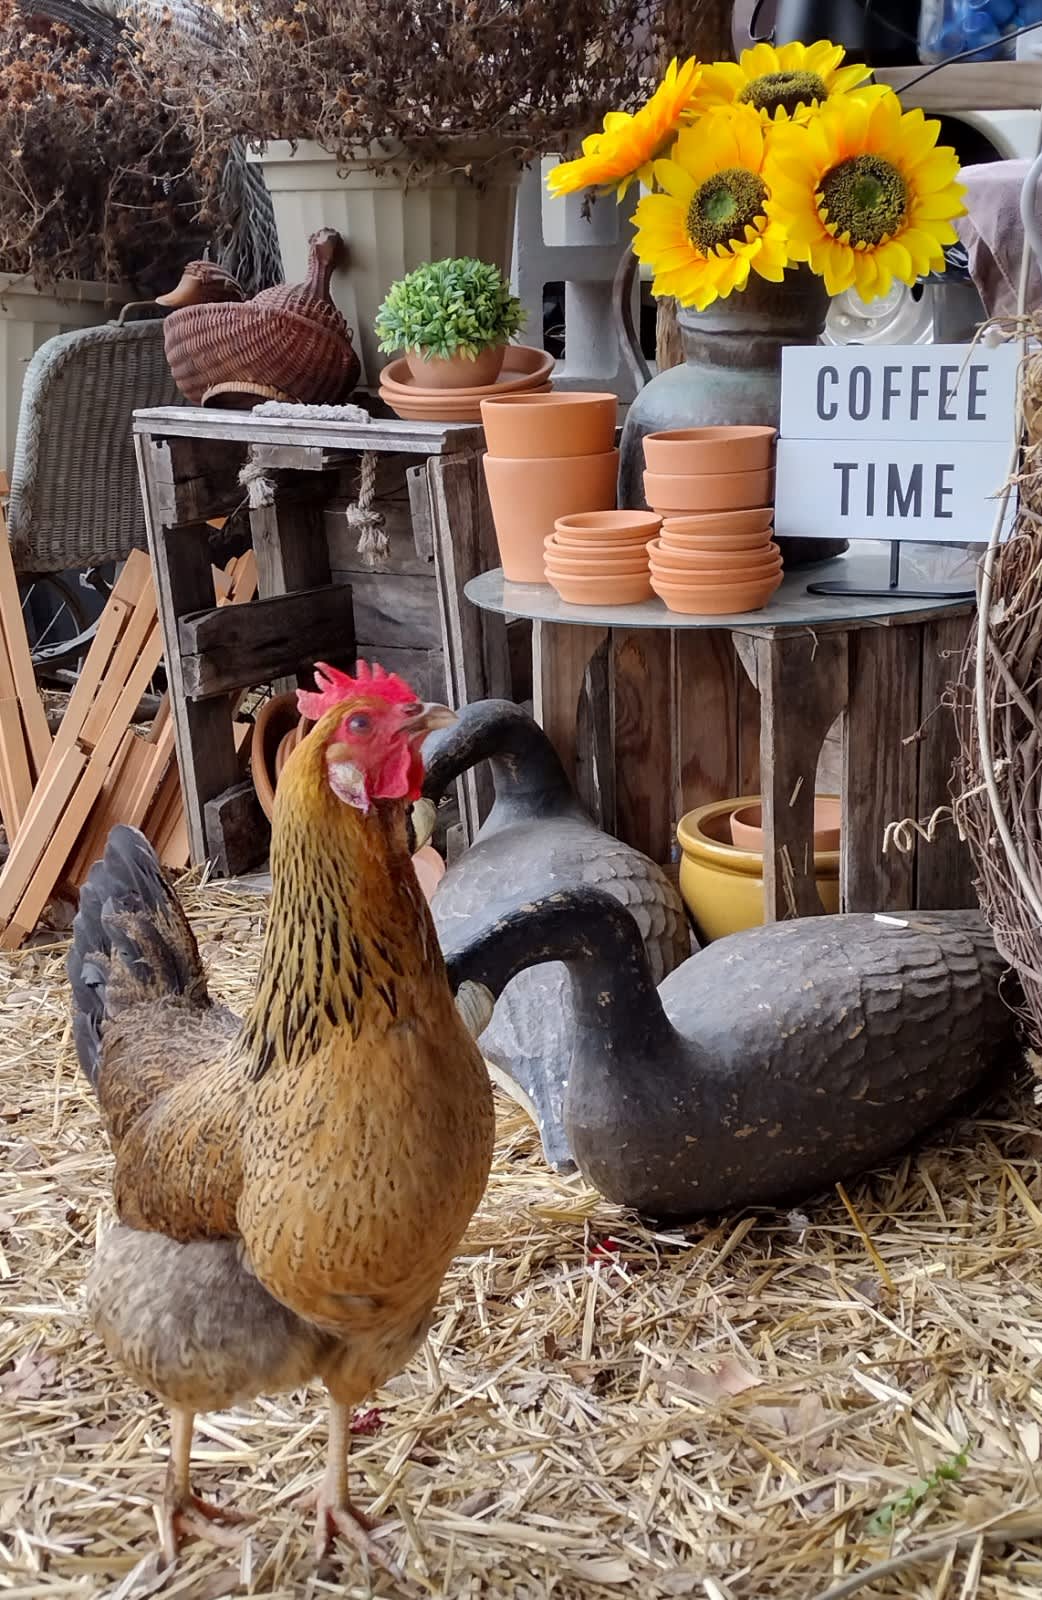 Don't be surprised if our feathered barnyard crew joins you for morning coffee in the barnyard cafe  . . .